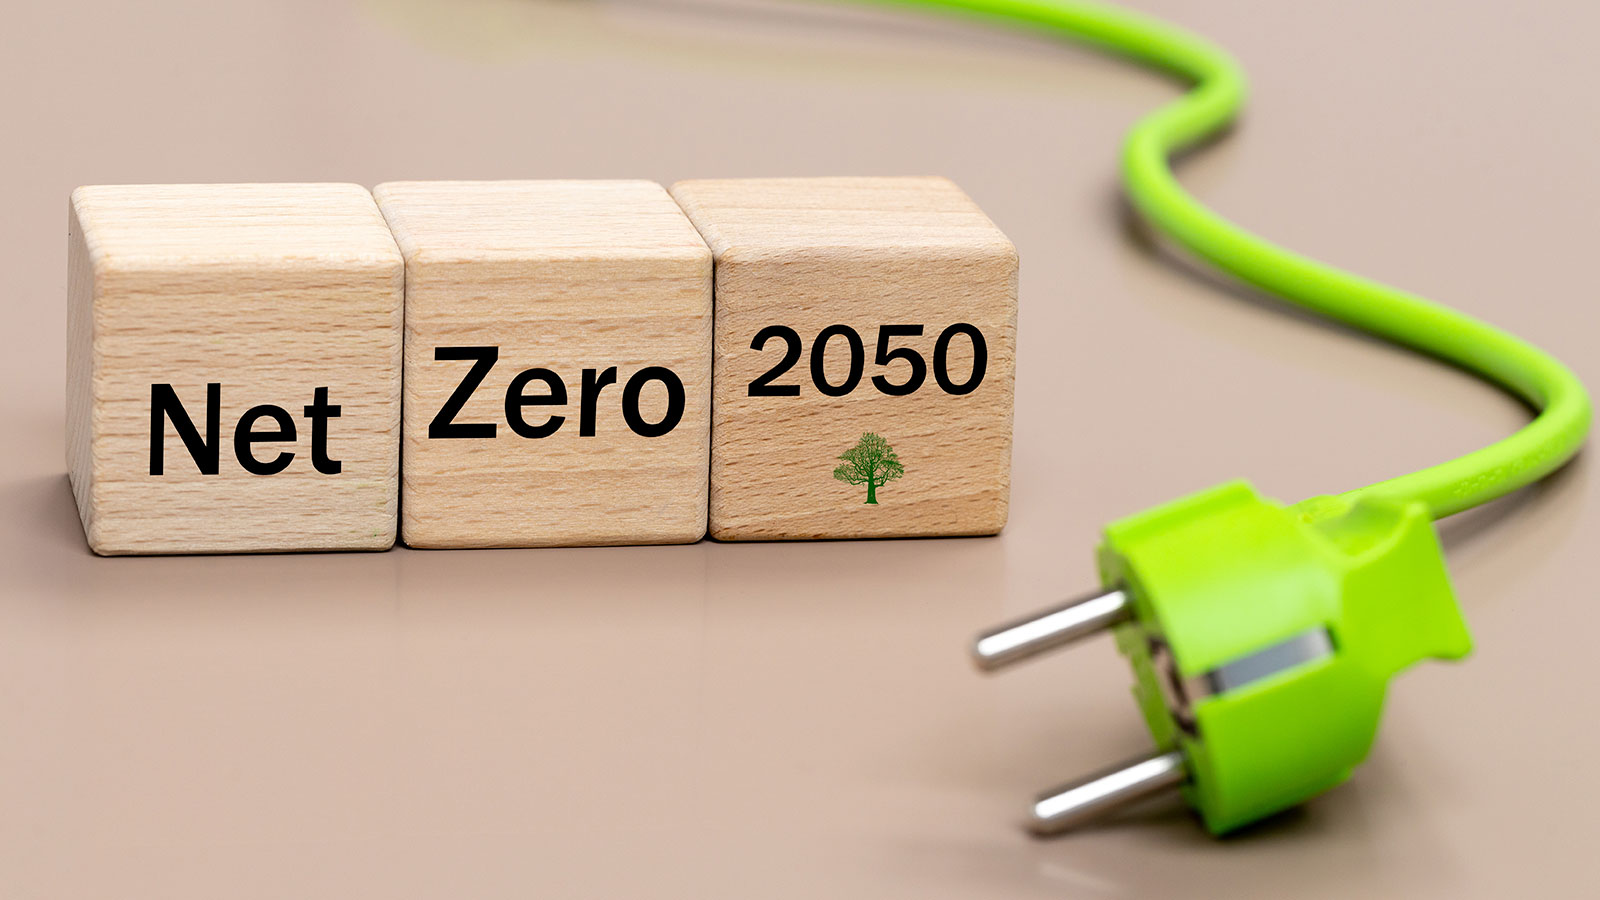 Prime Minister Rishi Sunak’s plans to delay some of the UK’s key commitments towards net zero have been met with backlash from both industry and across the political spectrum.